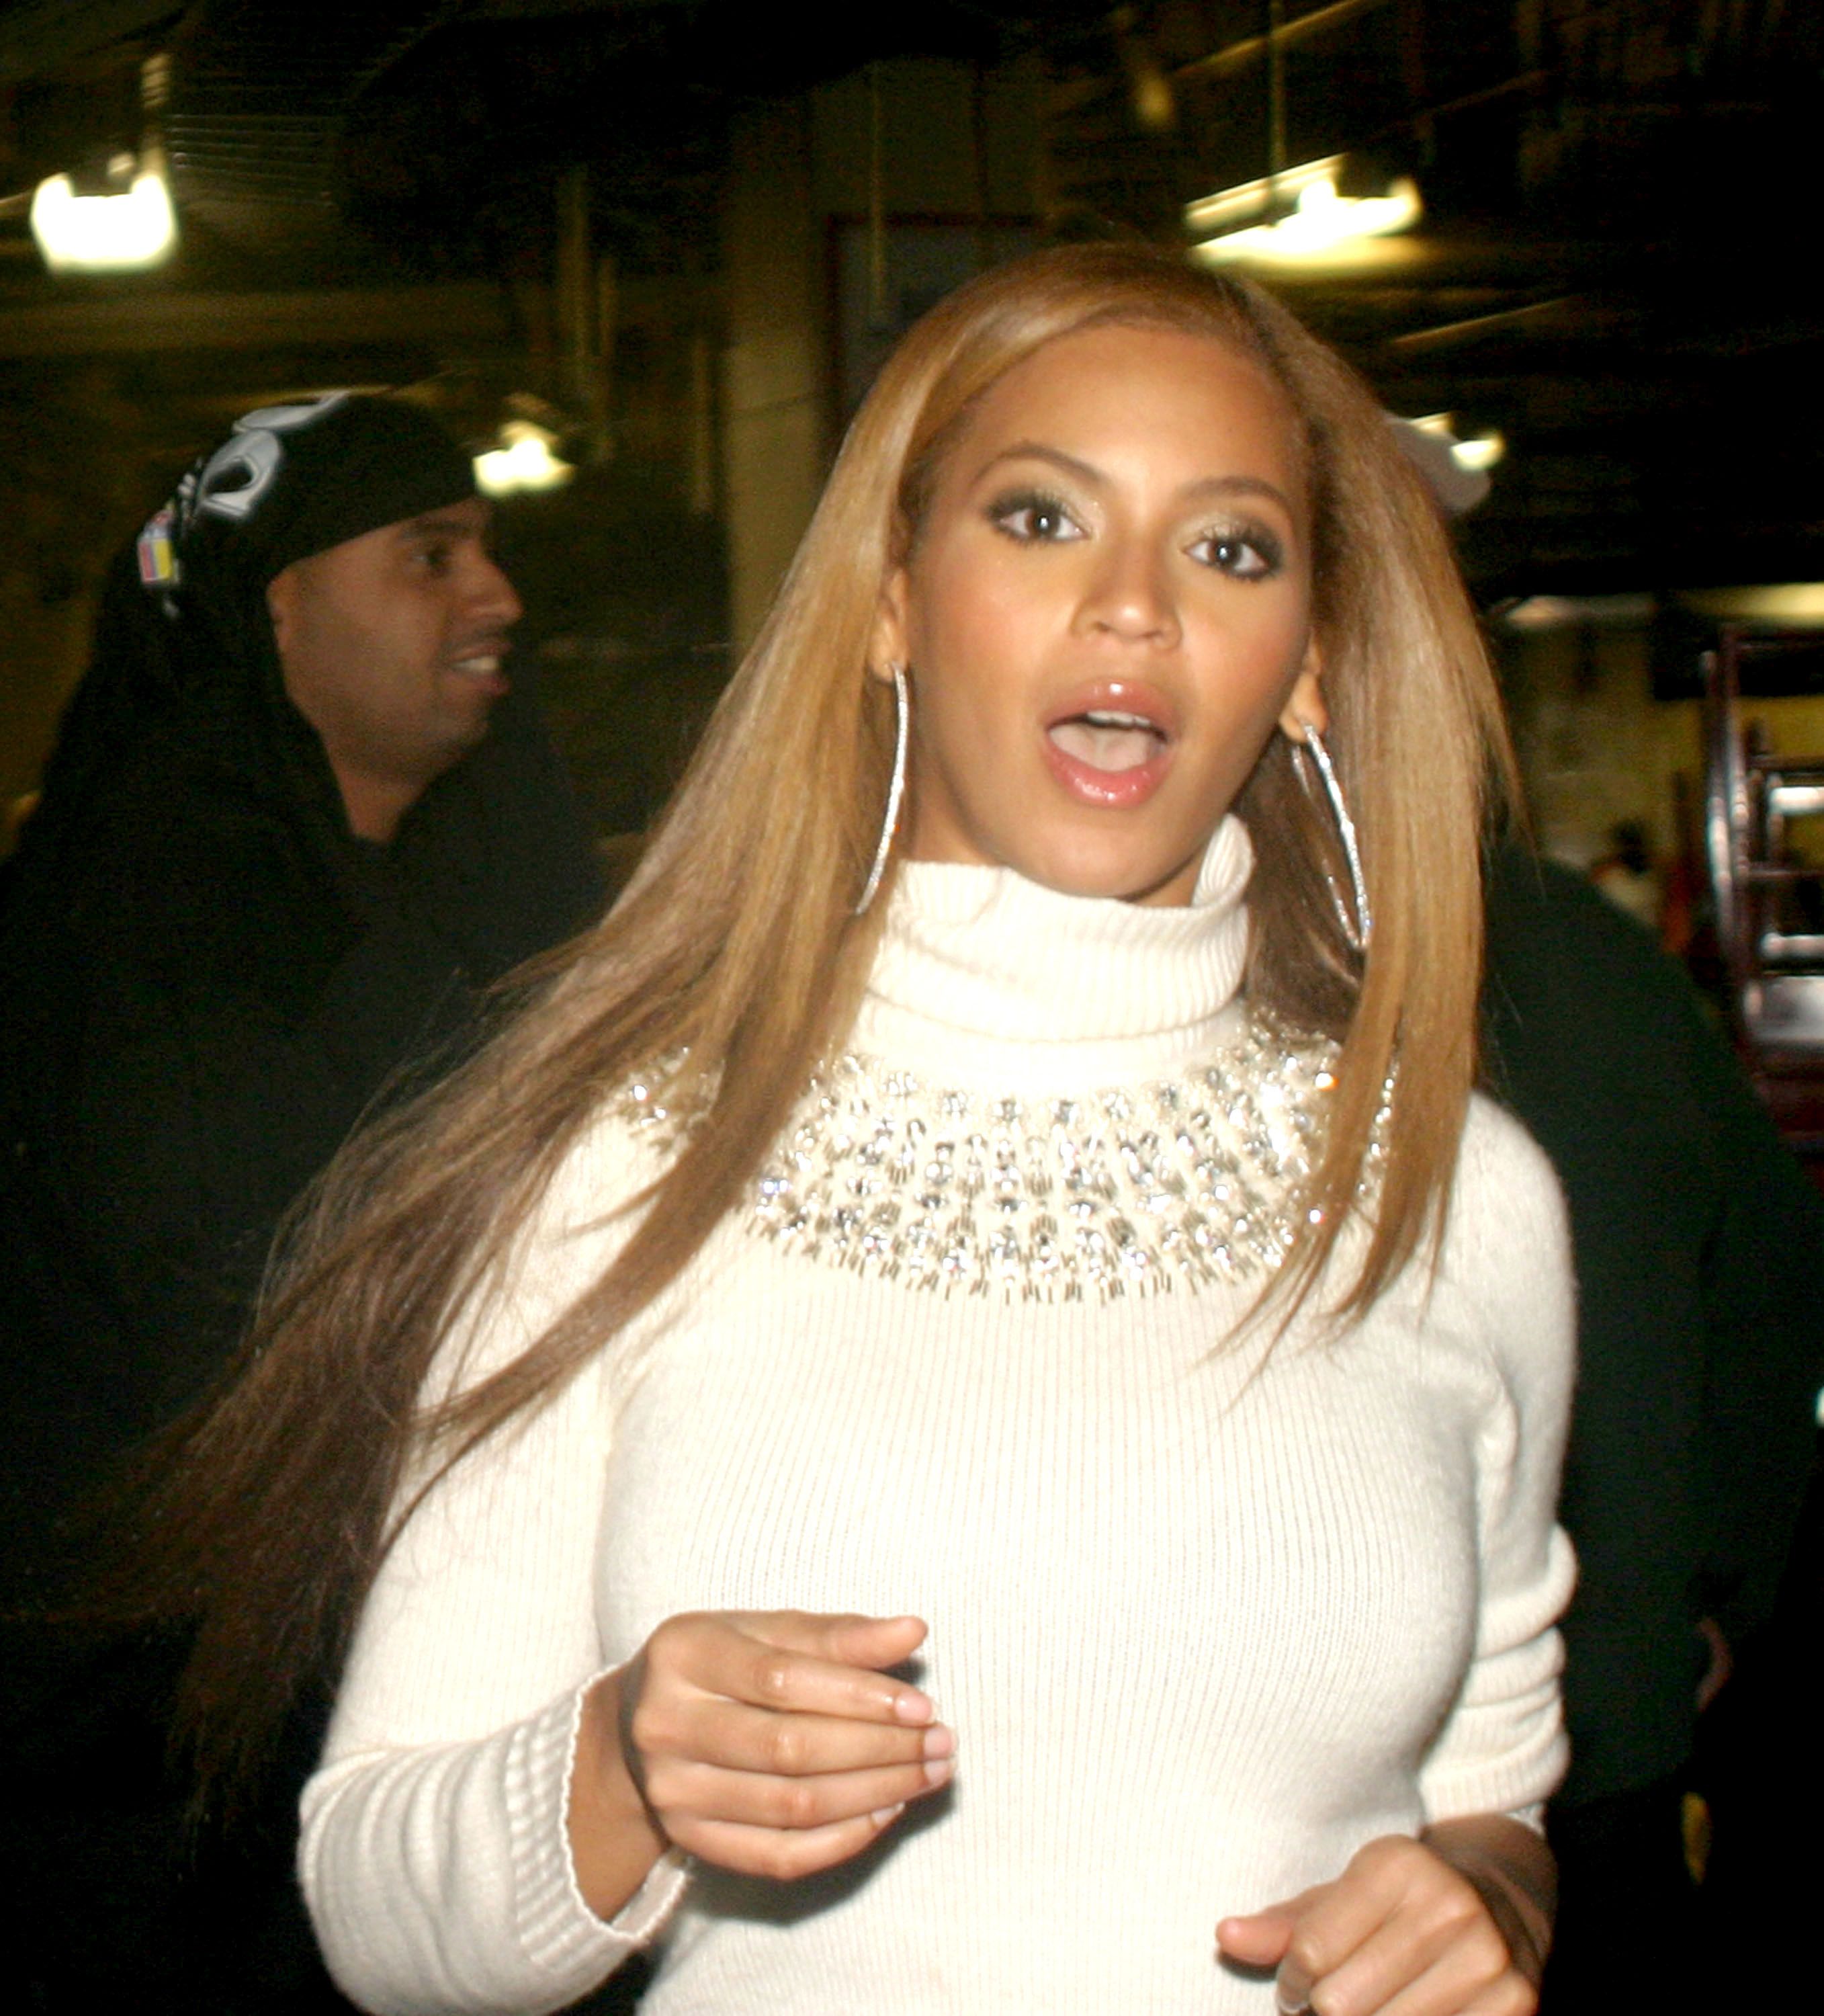 Beyonce at Power 105.1 FM presenting Jay-Z's "I Declare War" concert on October 27, 2005 in N.Y. | Photo: Getty Images